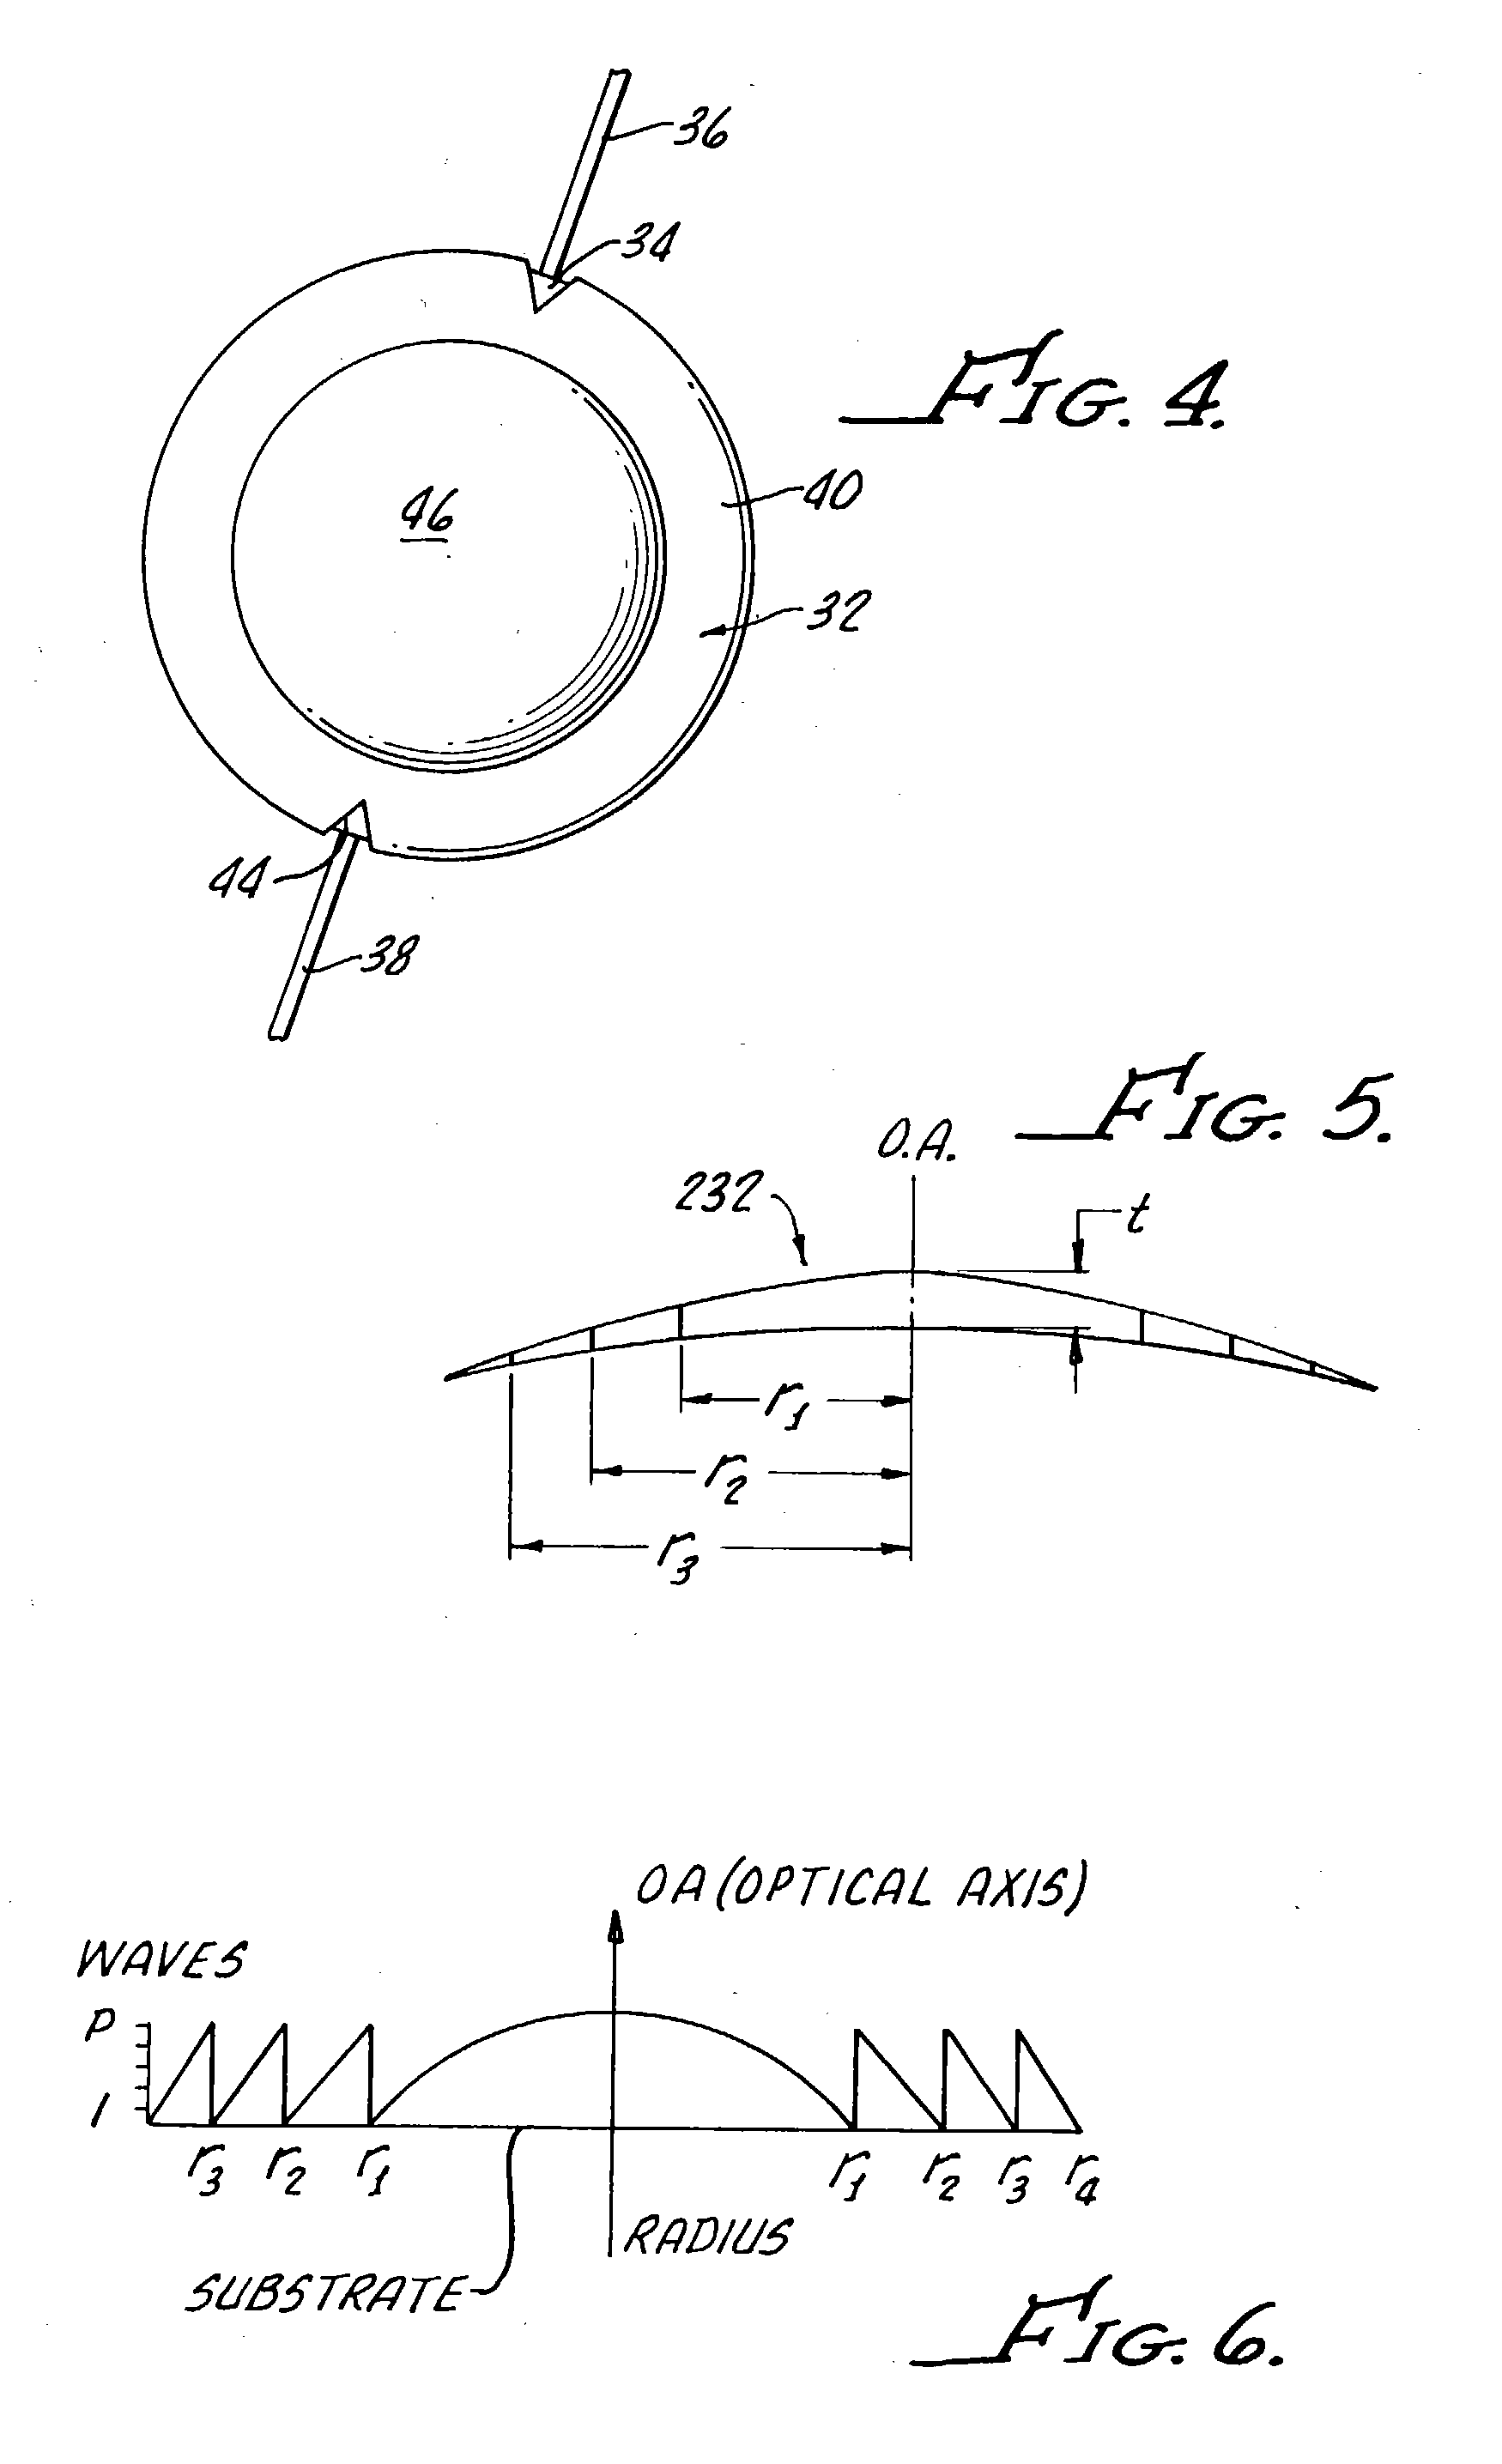 Primary and supplemental intraocular lens